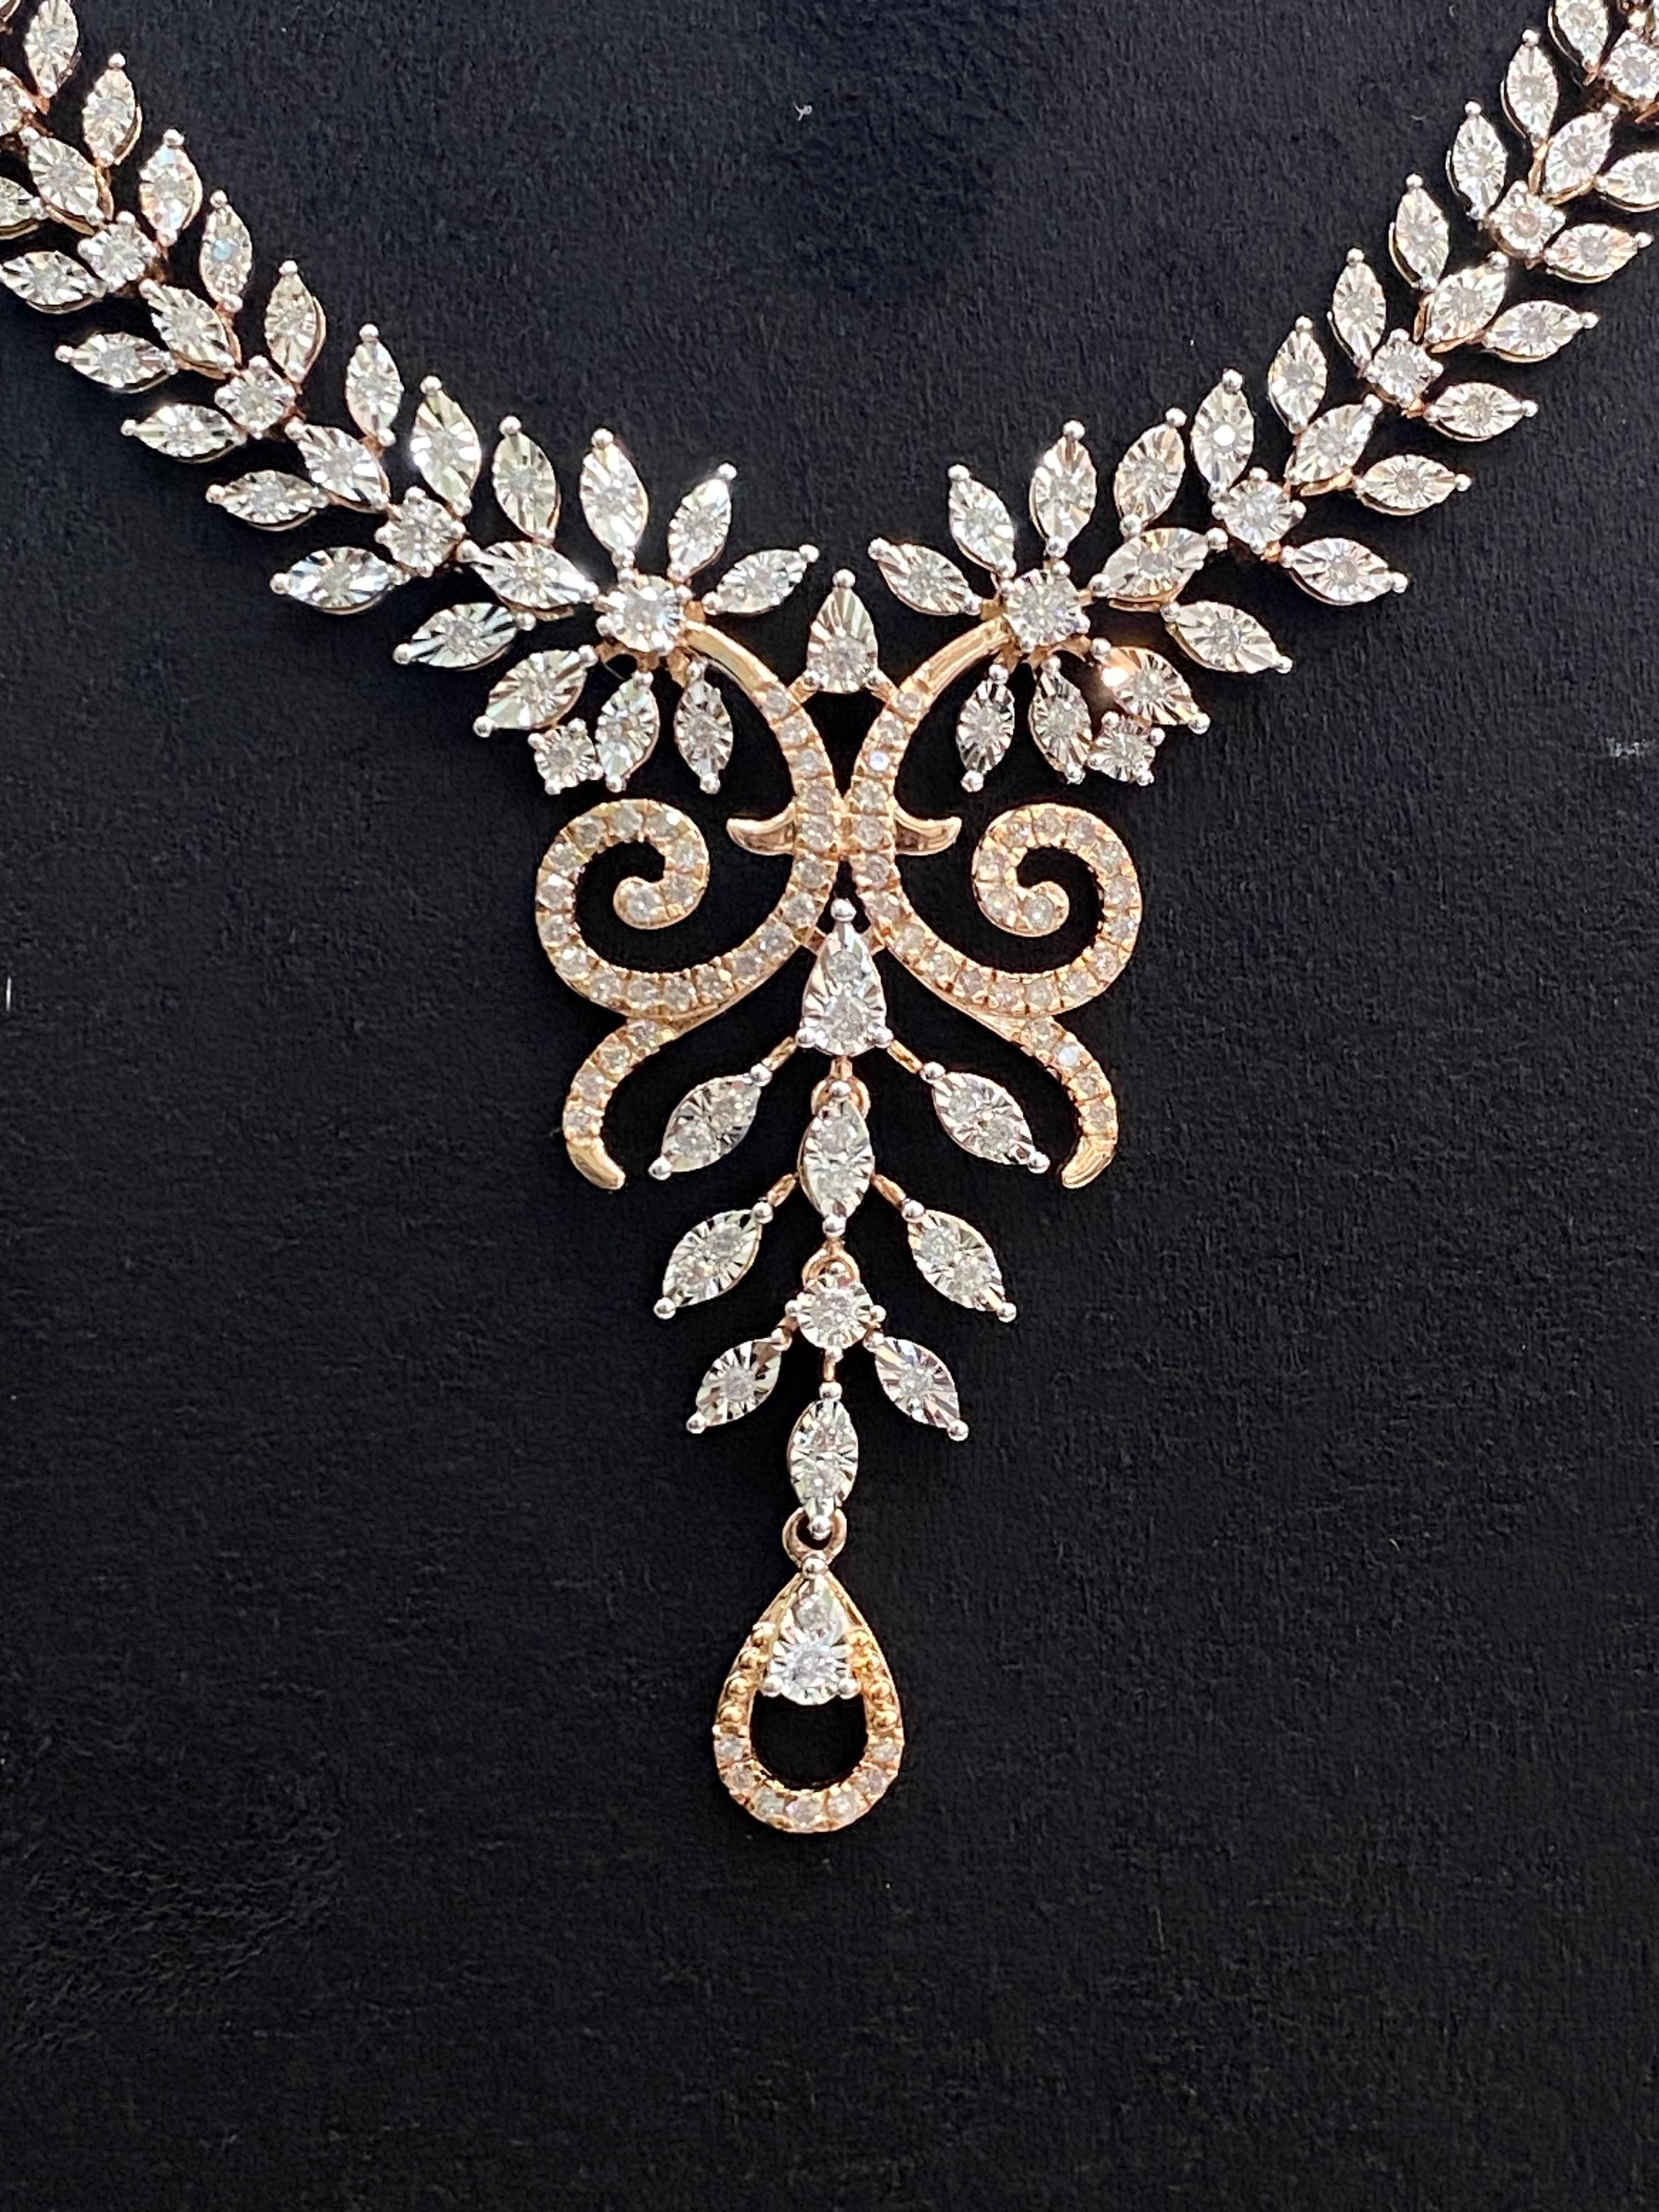 Indulge in Luxury: Stunning 2.29 Carat Round Brilliant Natural Diamond Wedding Necklace Ensemble in 14K Rose Gold - The Ultimate Gift for Every Celebration!

Specifications - 
Necklace Length : 17 Inches (Custom Length Available)

Diamond Weight :